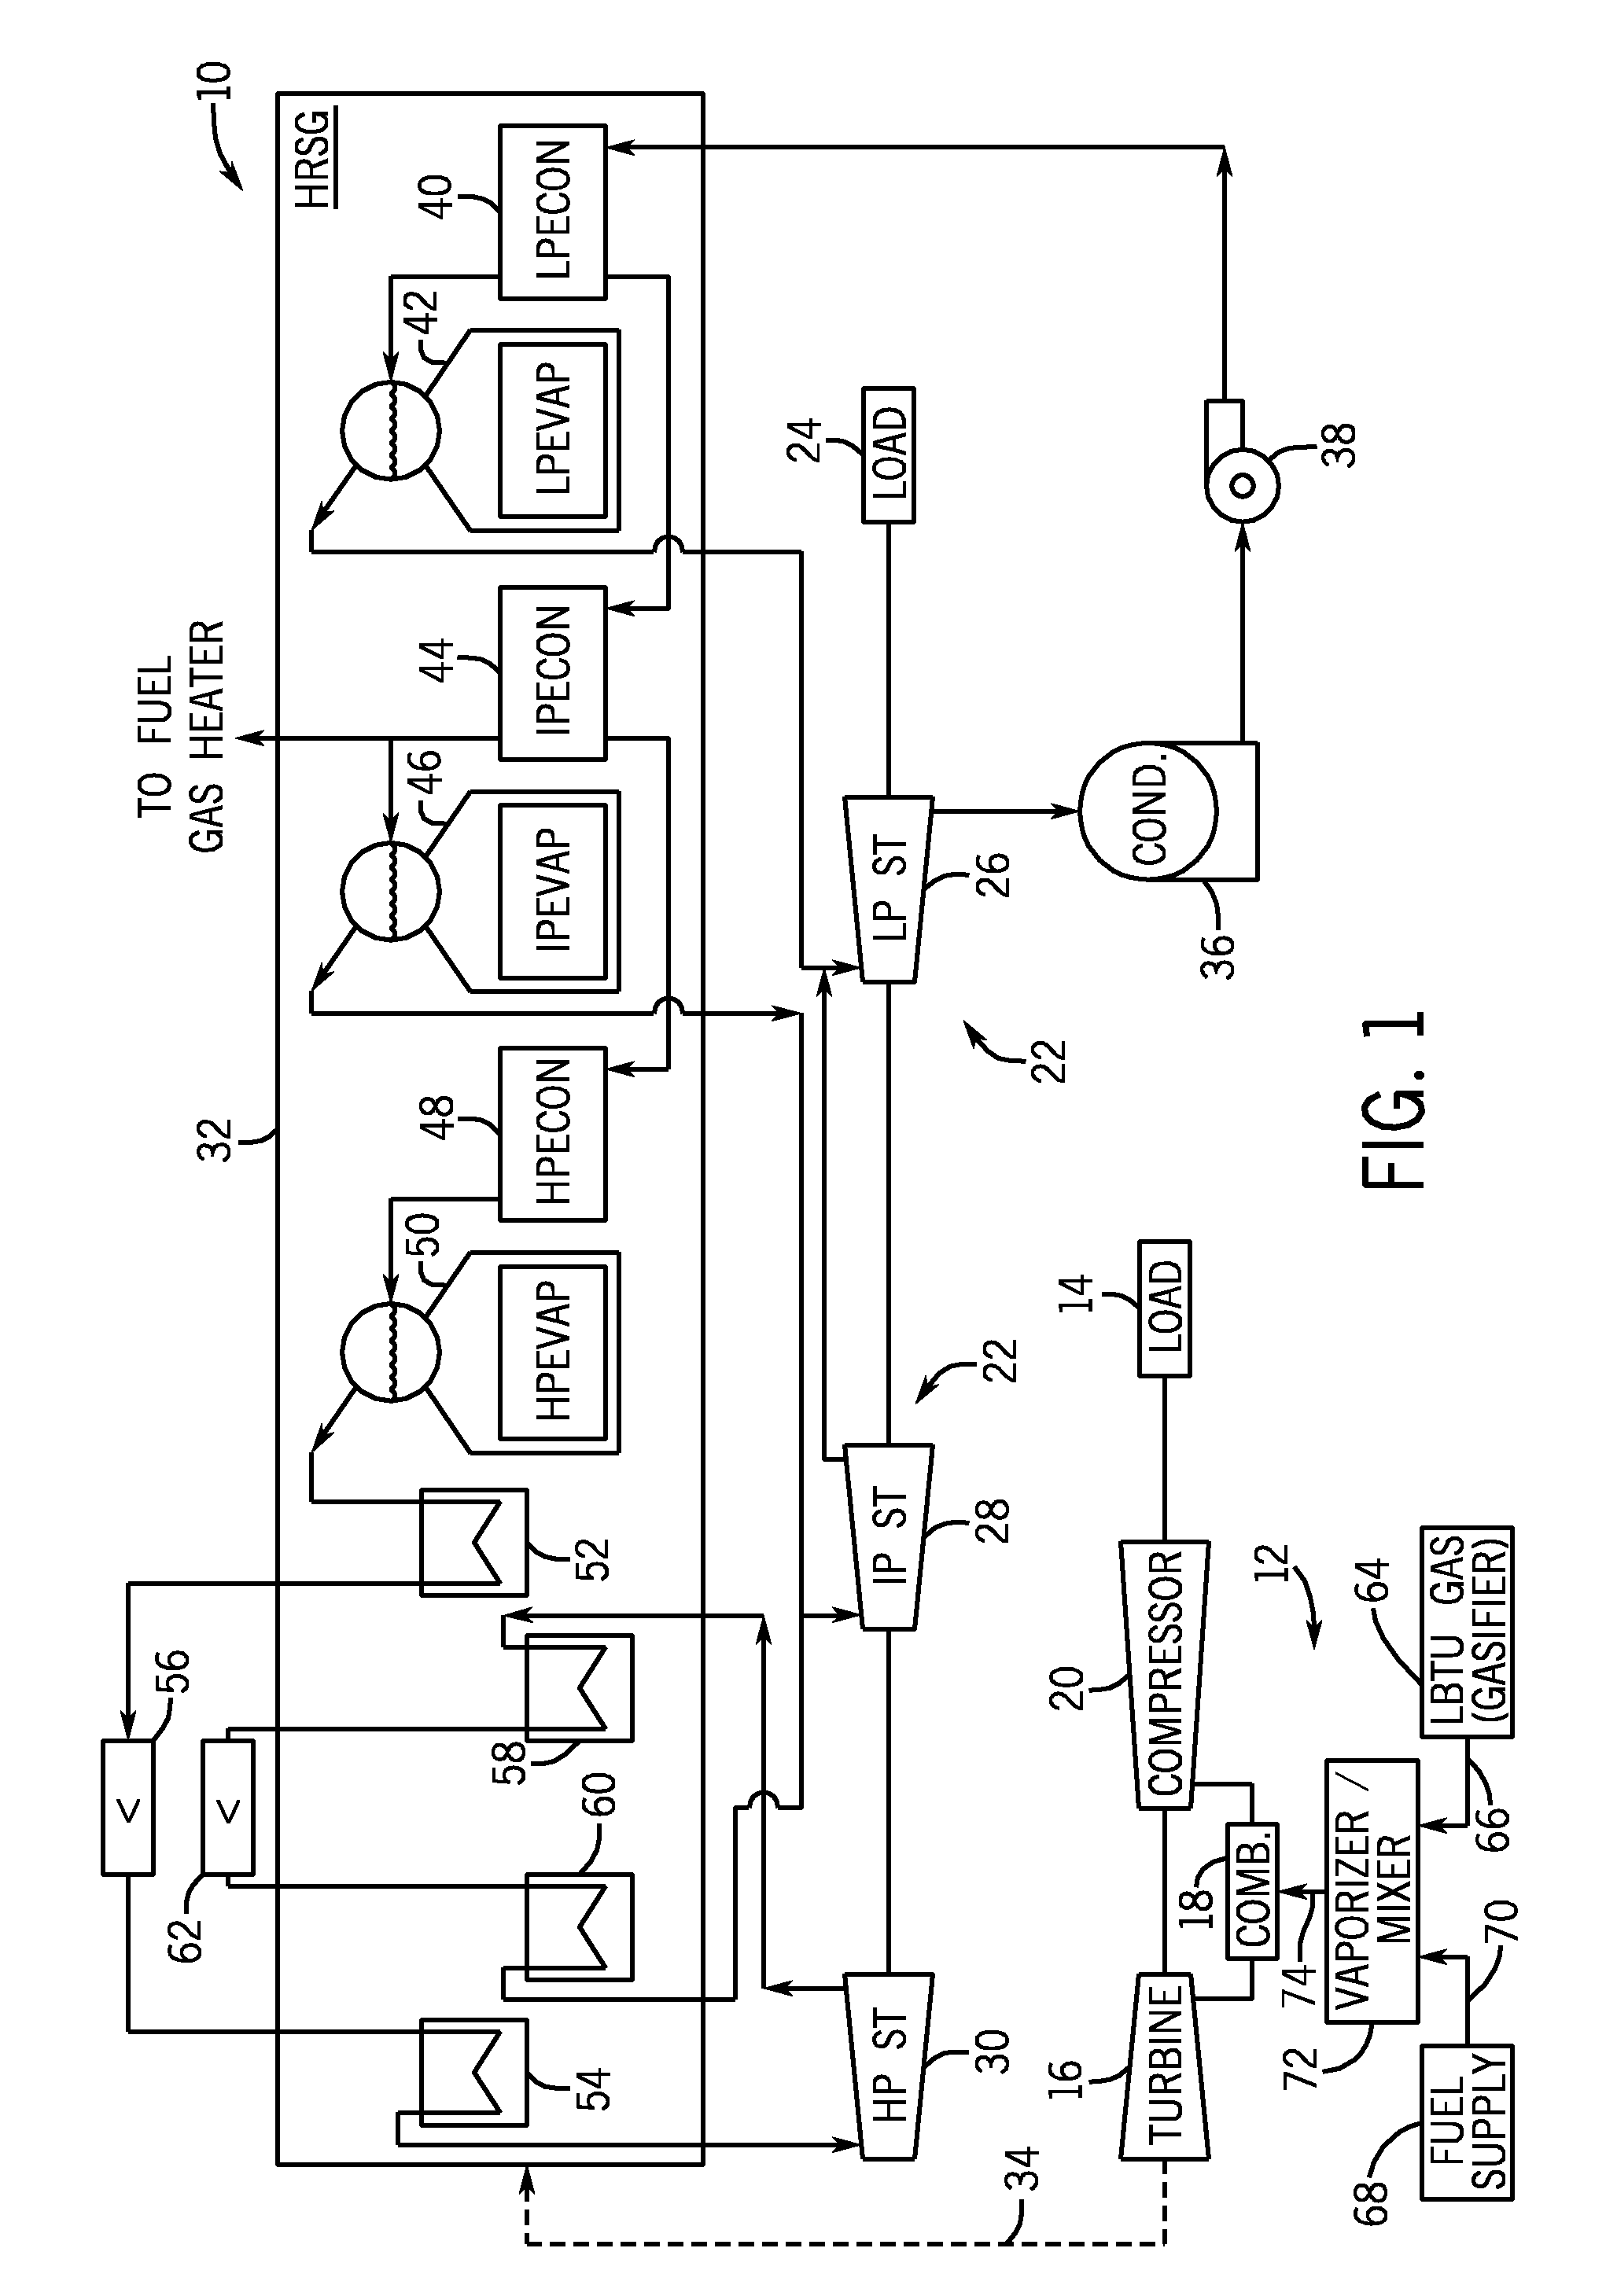 Method and apparatus for controlling a heating value of a low energy fuel